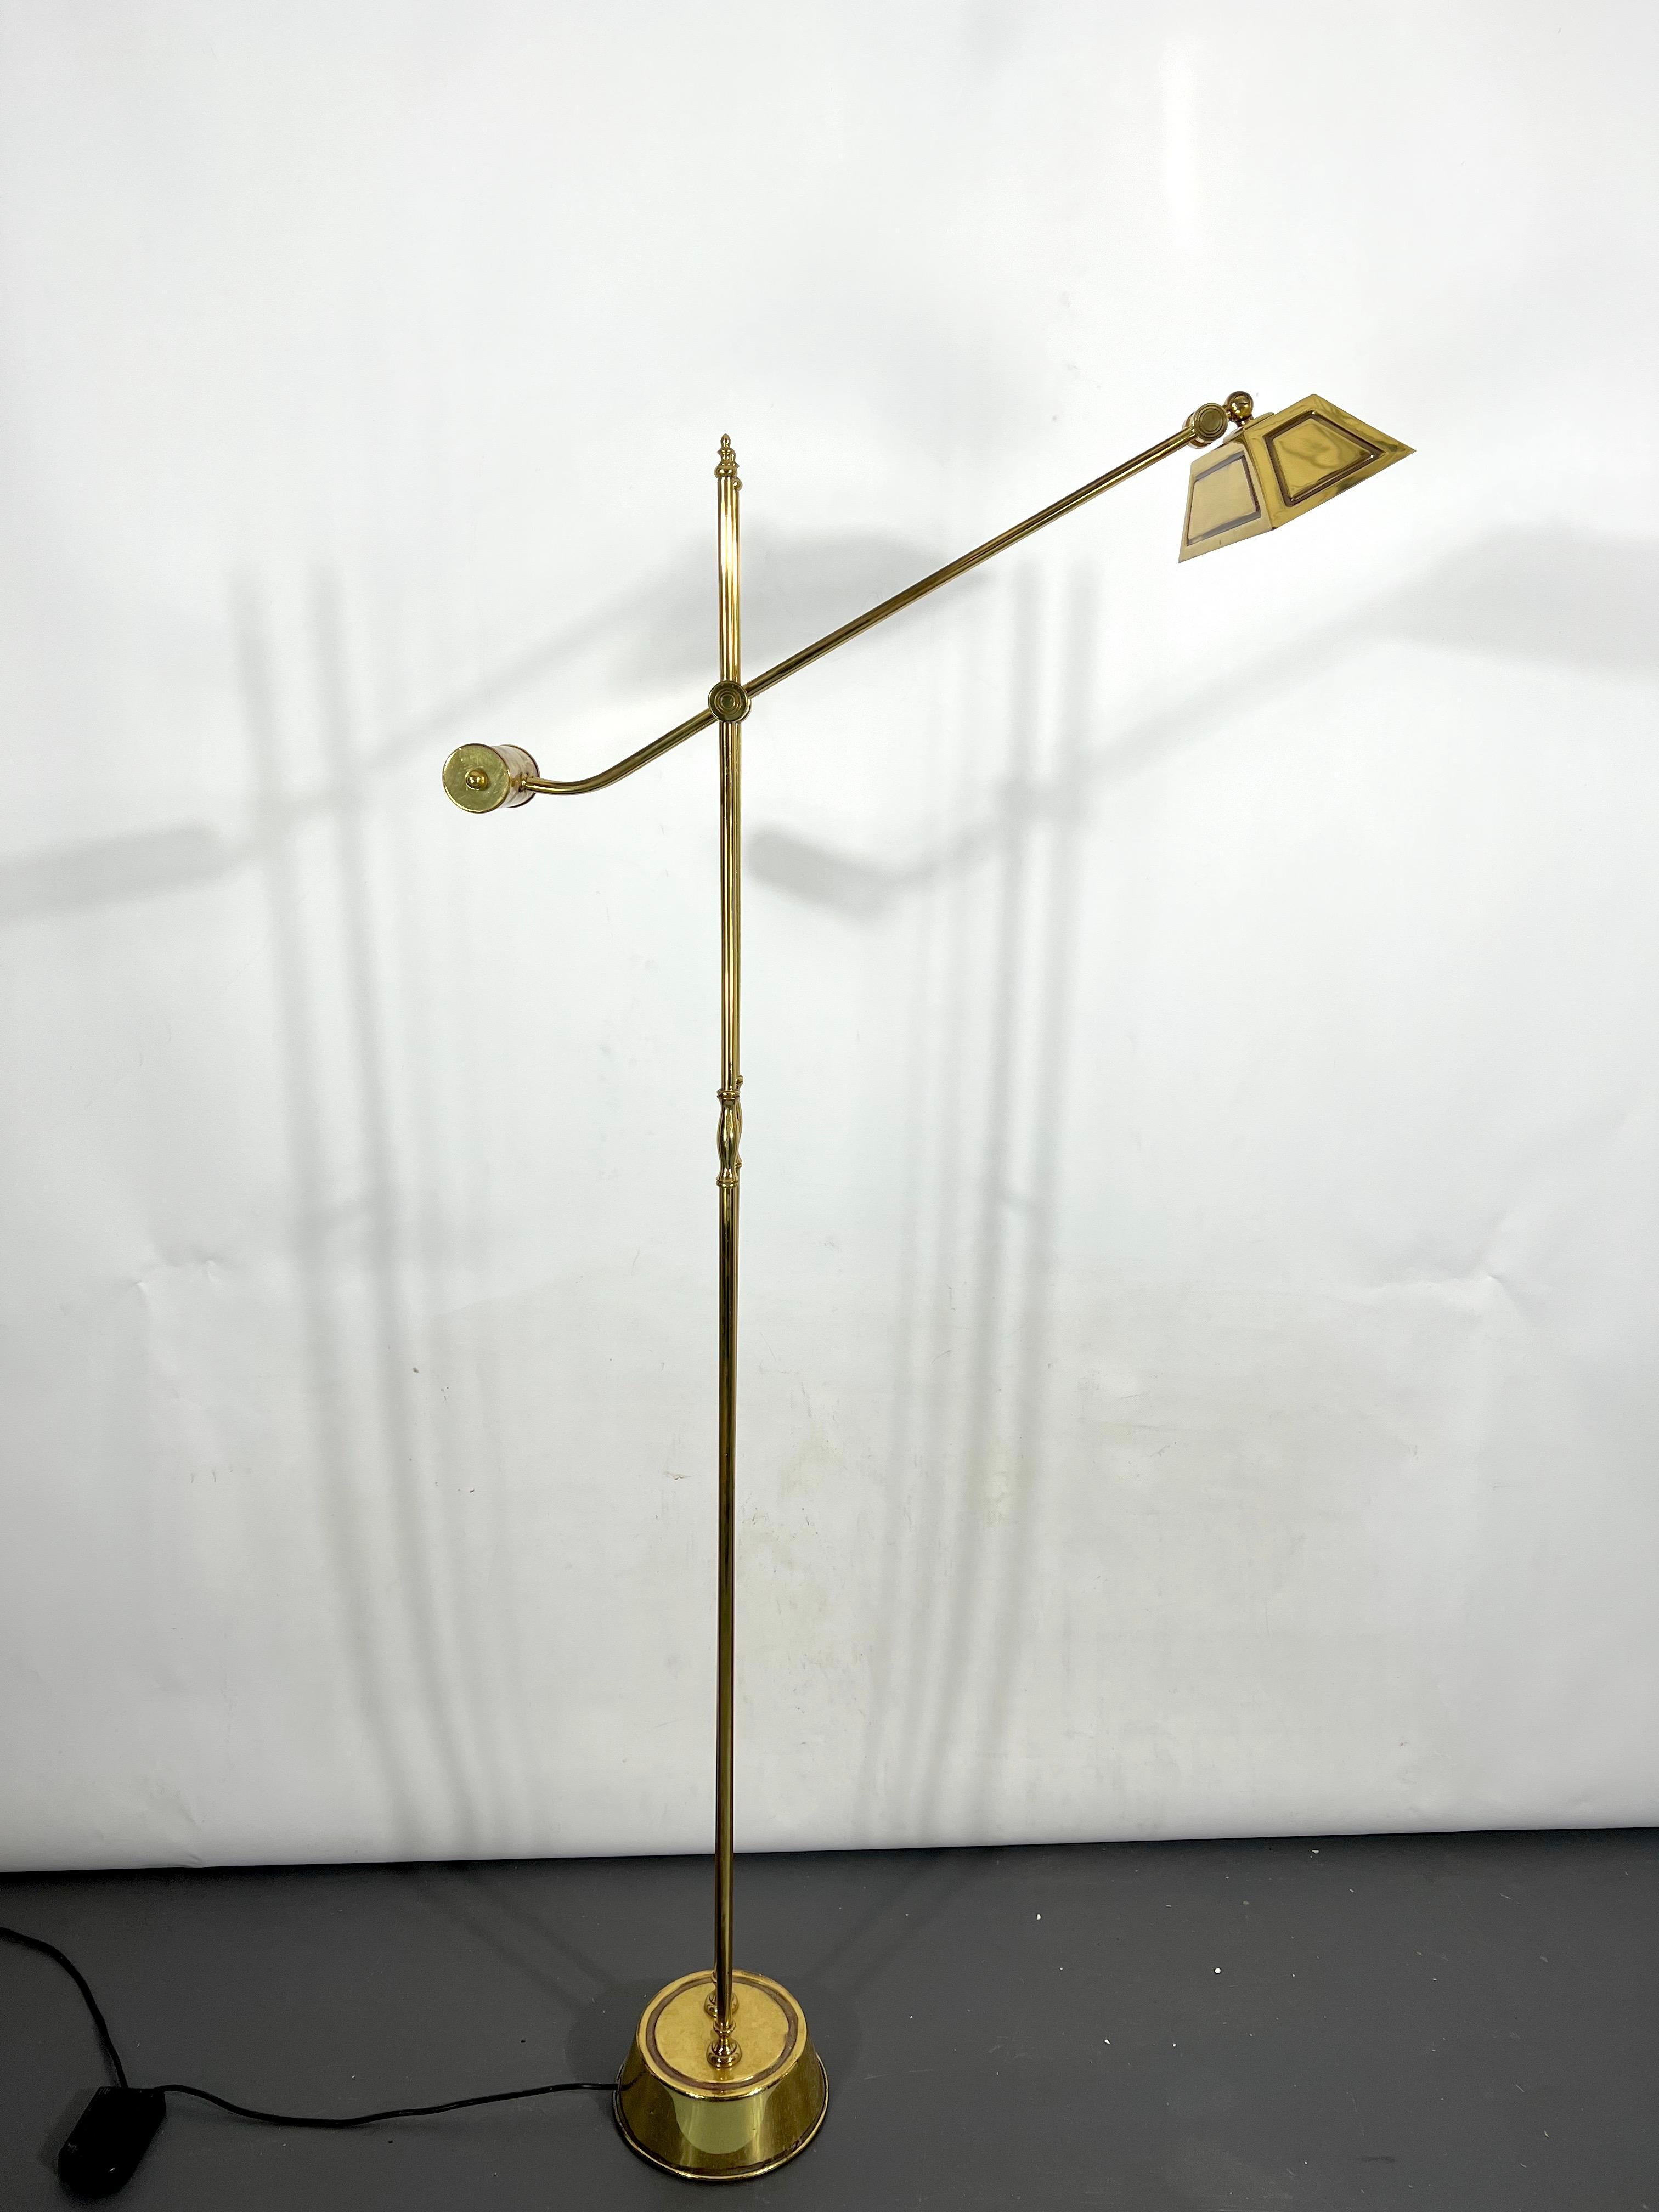 Great vintage condition with normal trace of age and use for this halogen floor lamp produced in Italy during the 70s and made from solid brass. Full working with EU standard, adaptable on demand for USA standard.